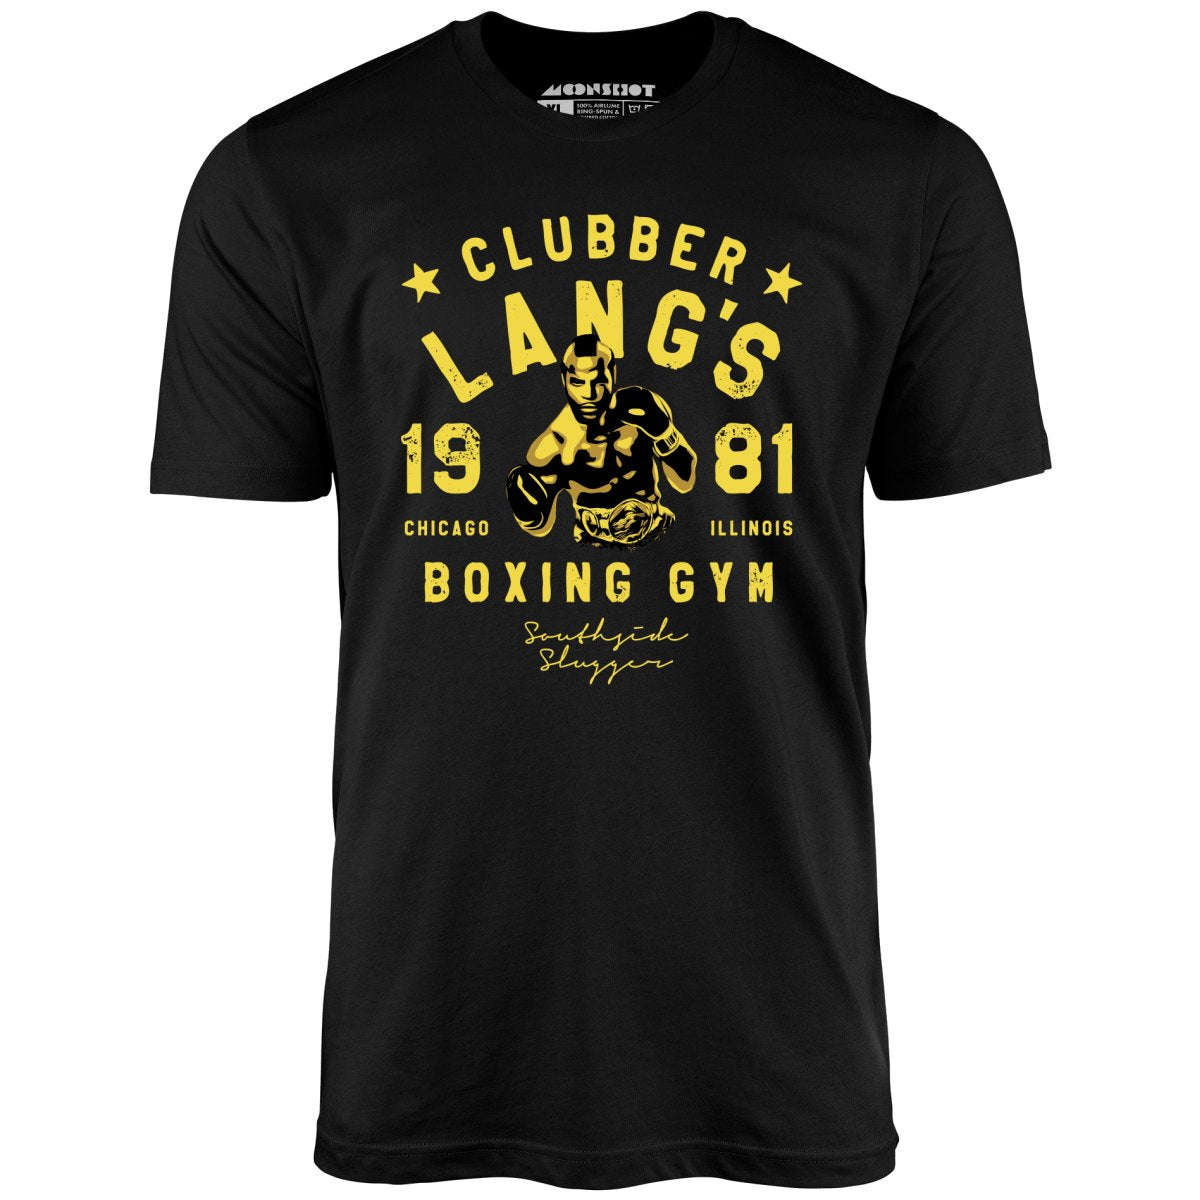 Clubber Lang's Boxing Gym - Unisex T-Shirt